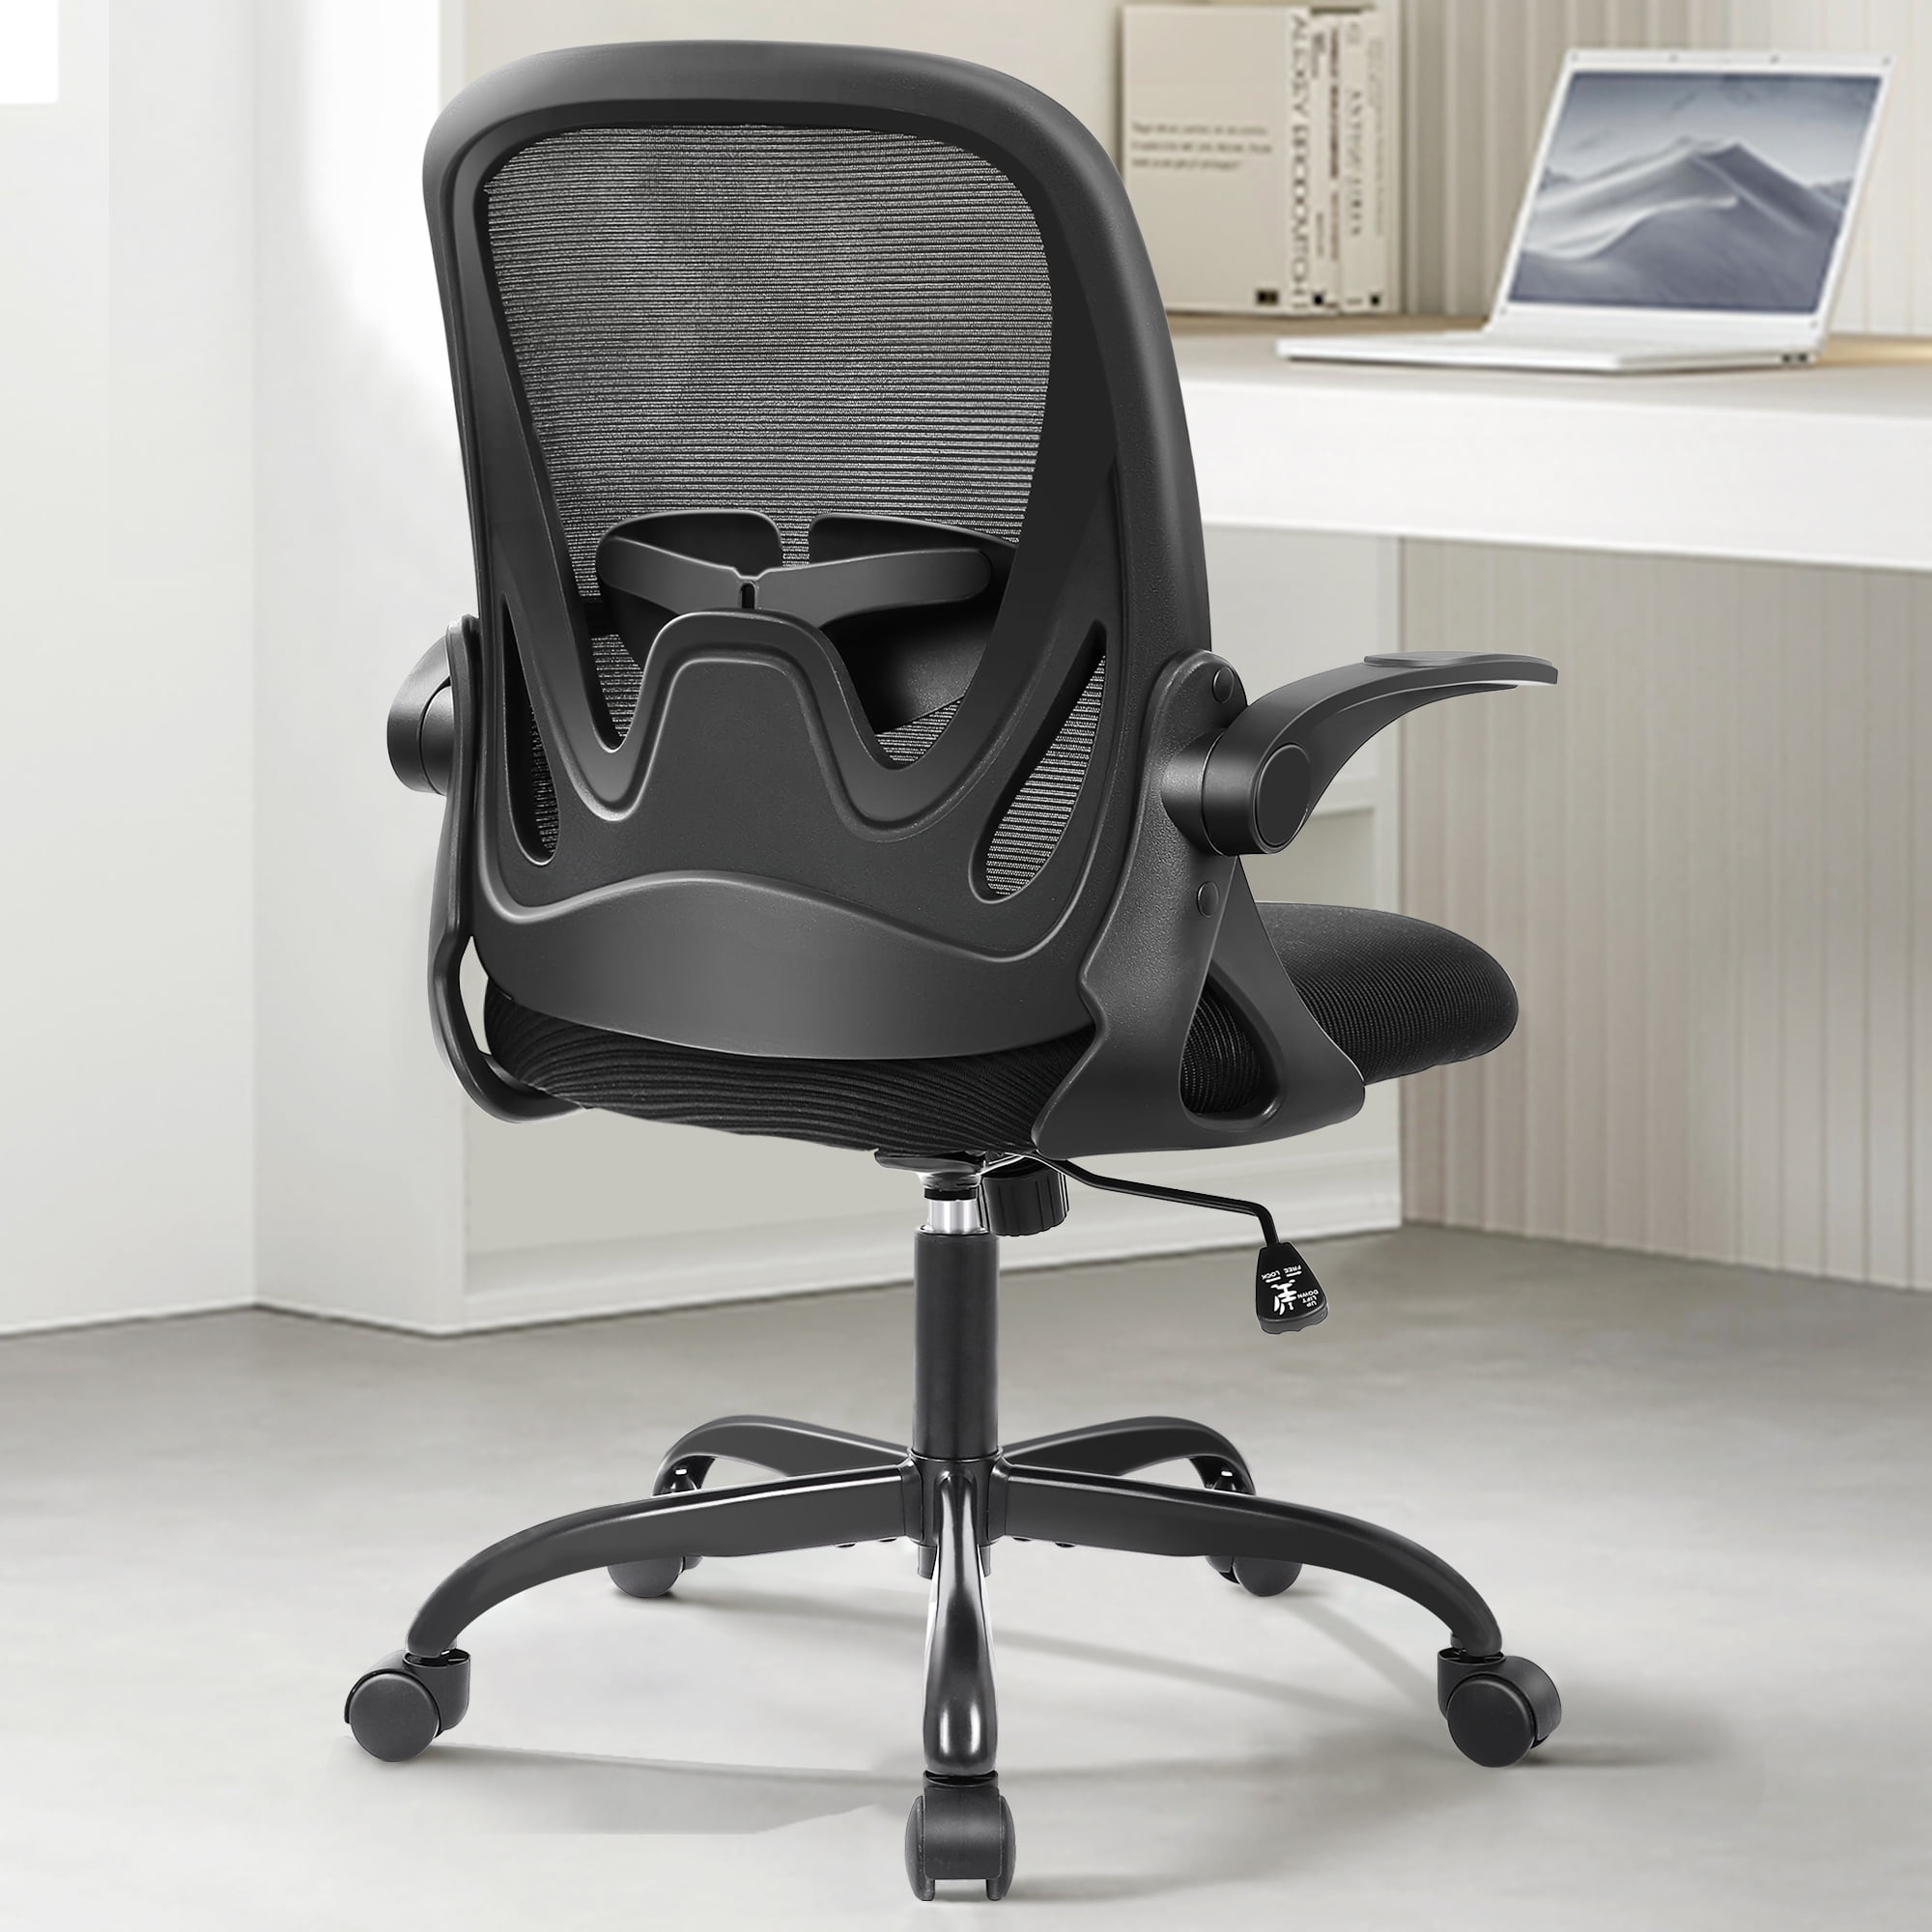 Coolhut Executive Office Chair, Big & Tall Office Chair, Foot Rest